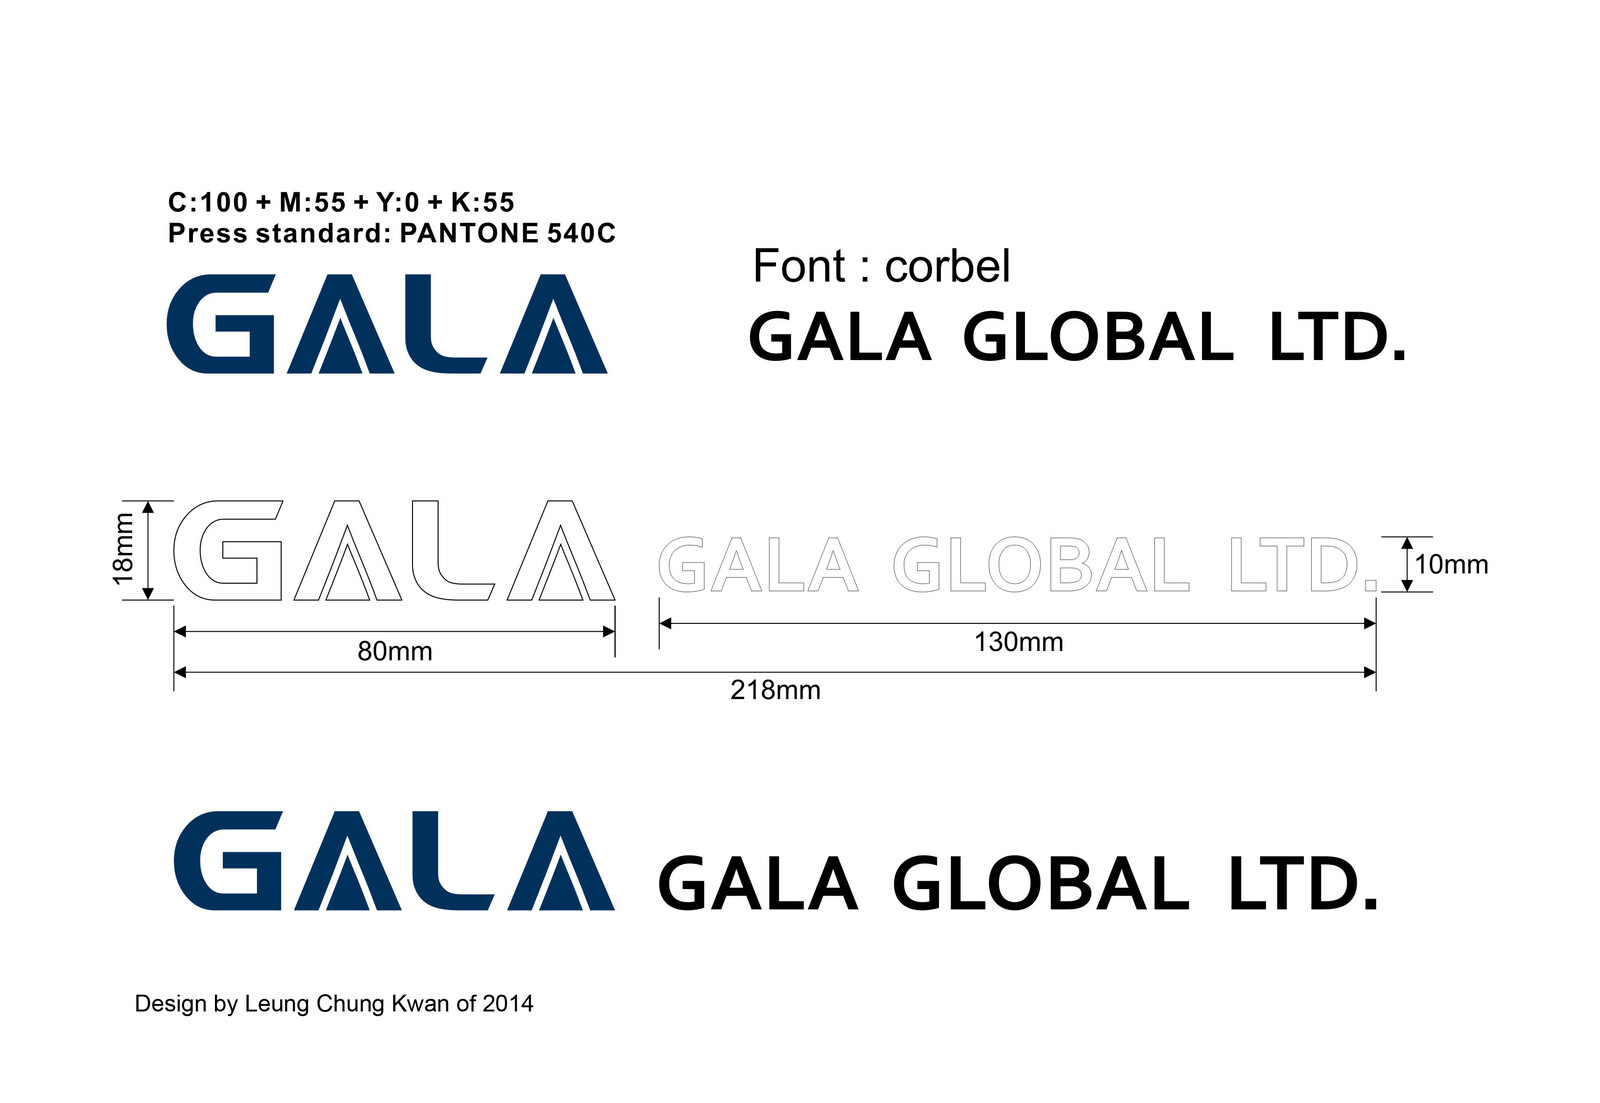 💎 Logo | Design by Leung Chung Kwan on 2014 💎
Brand Name︰GALA | Client︰Gala Global Limited